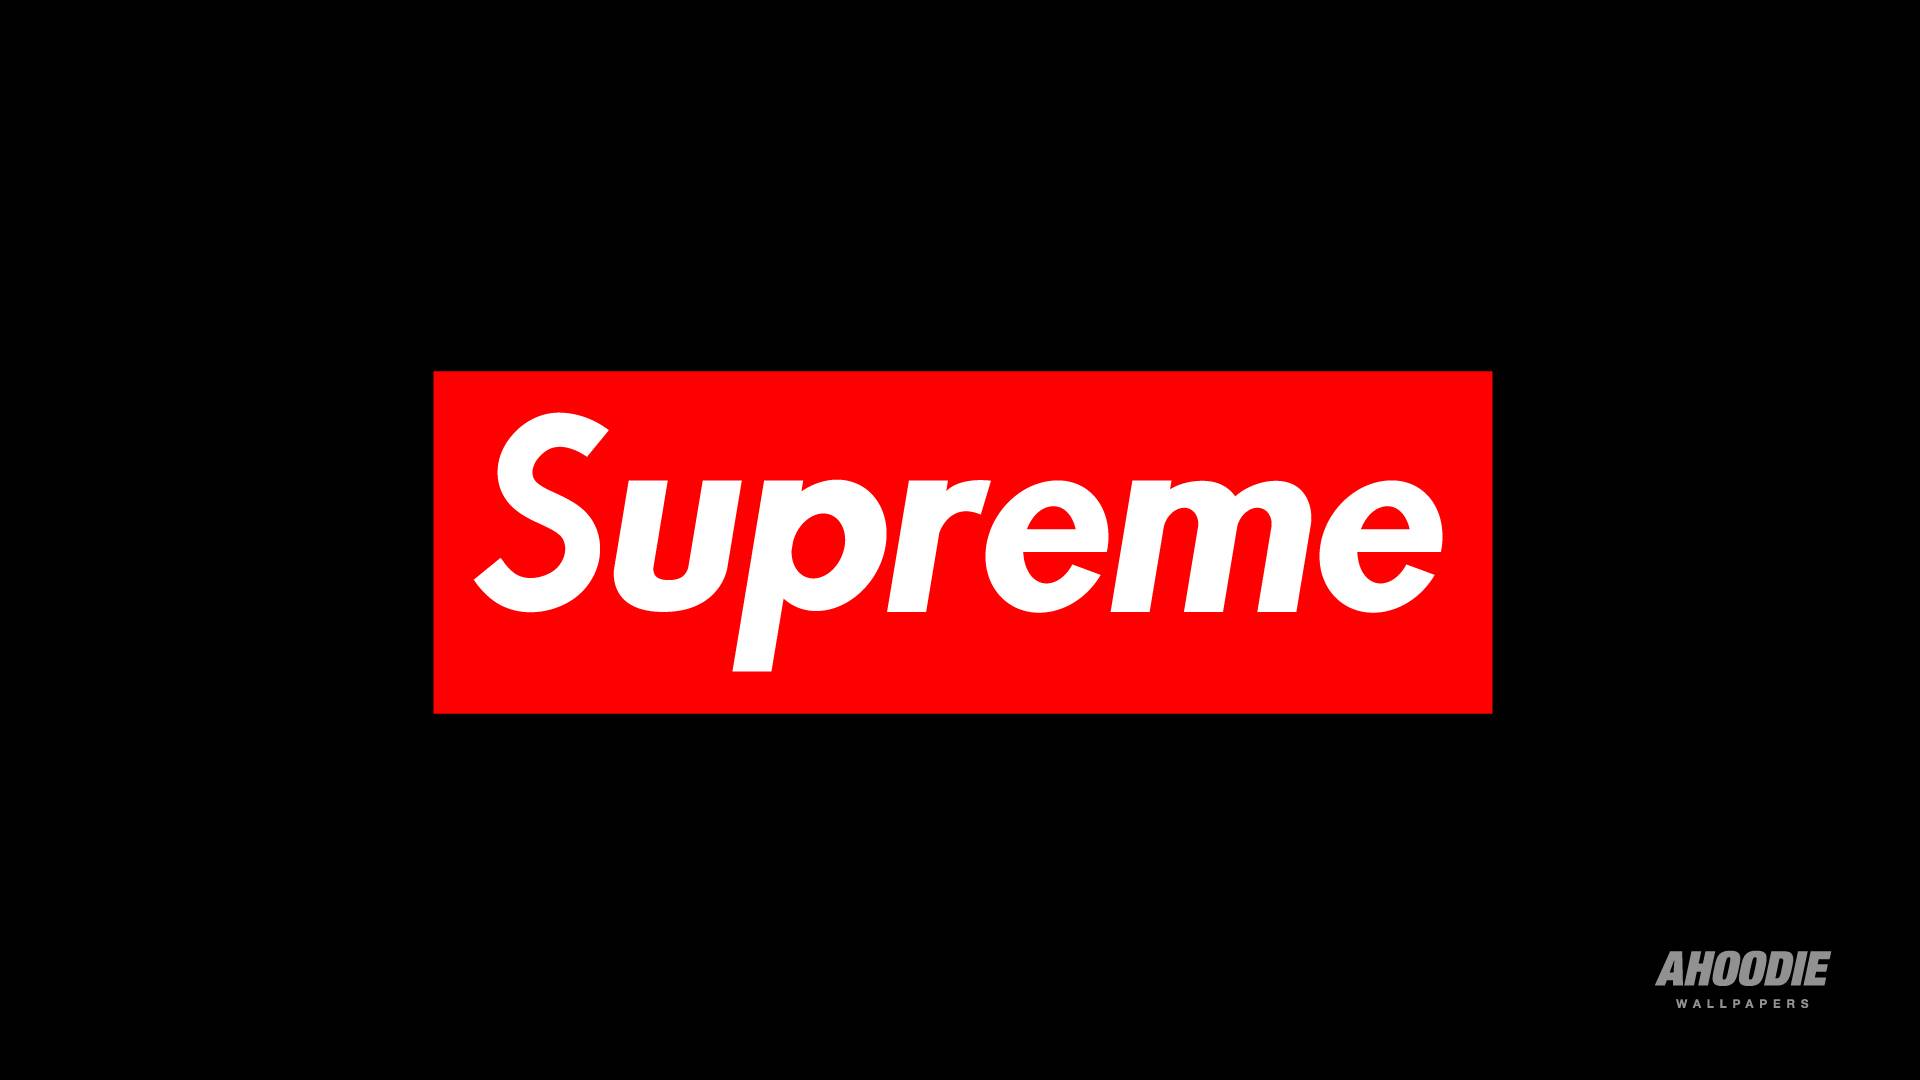 Download Supreme LV Wallpaper by Prybz - 72 - Free on ZEDGE™️ now